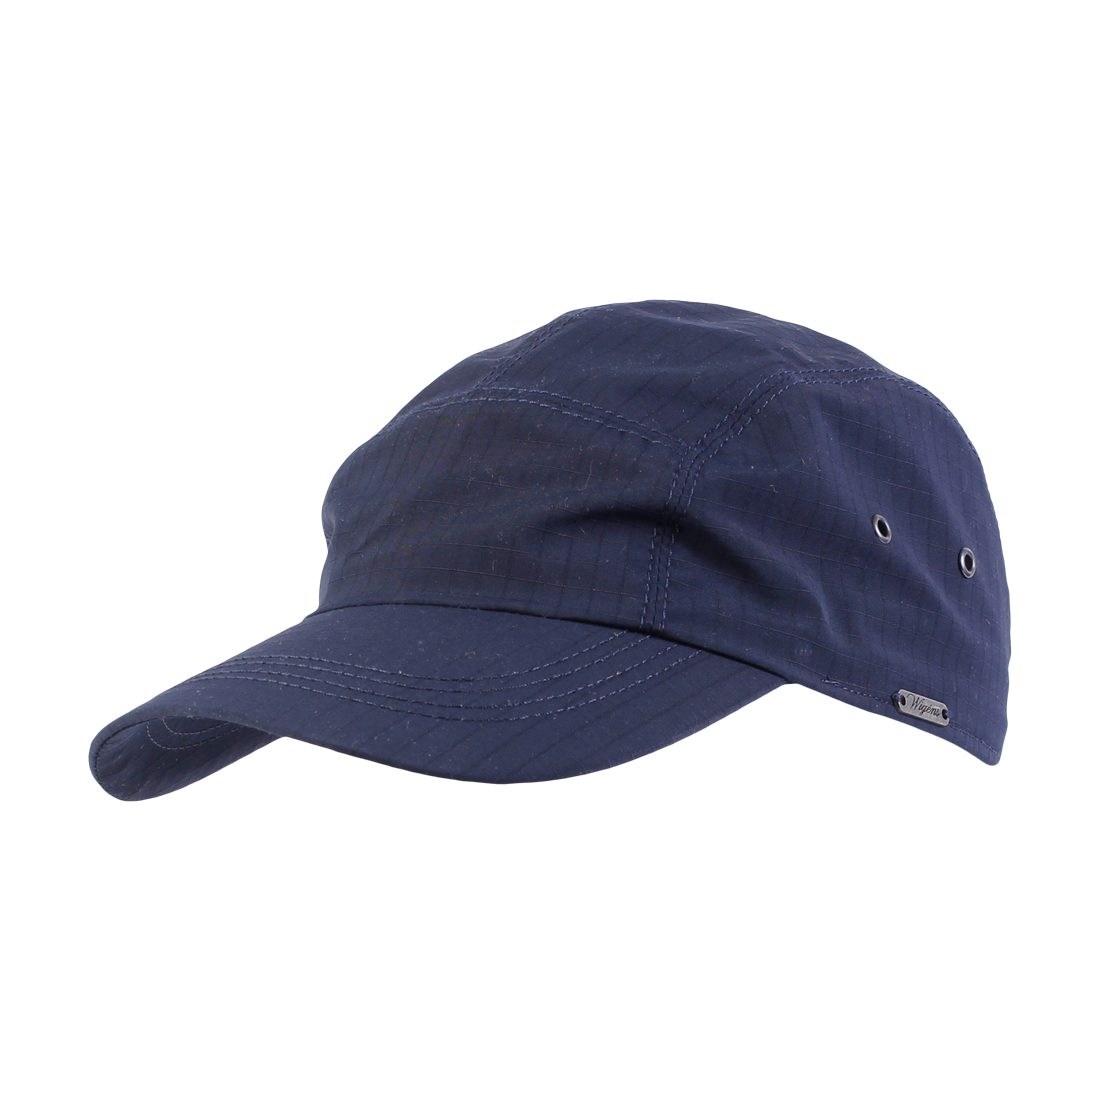 Baseball Classic Cap in Navy HD Ripstop (Size 61) by Wigens